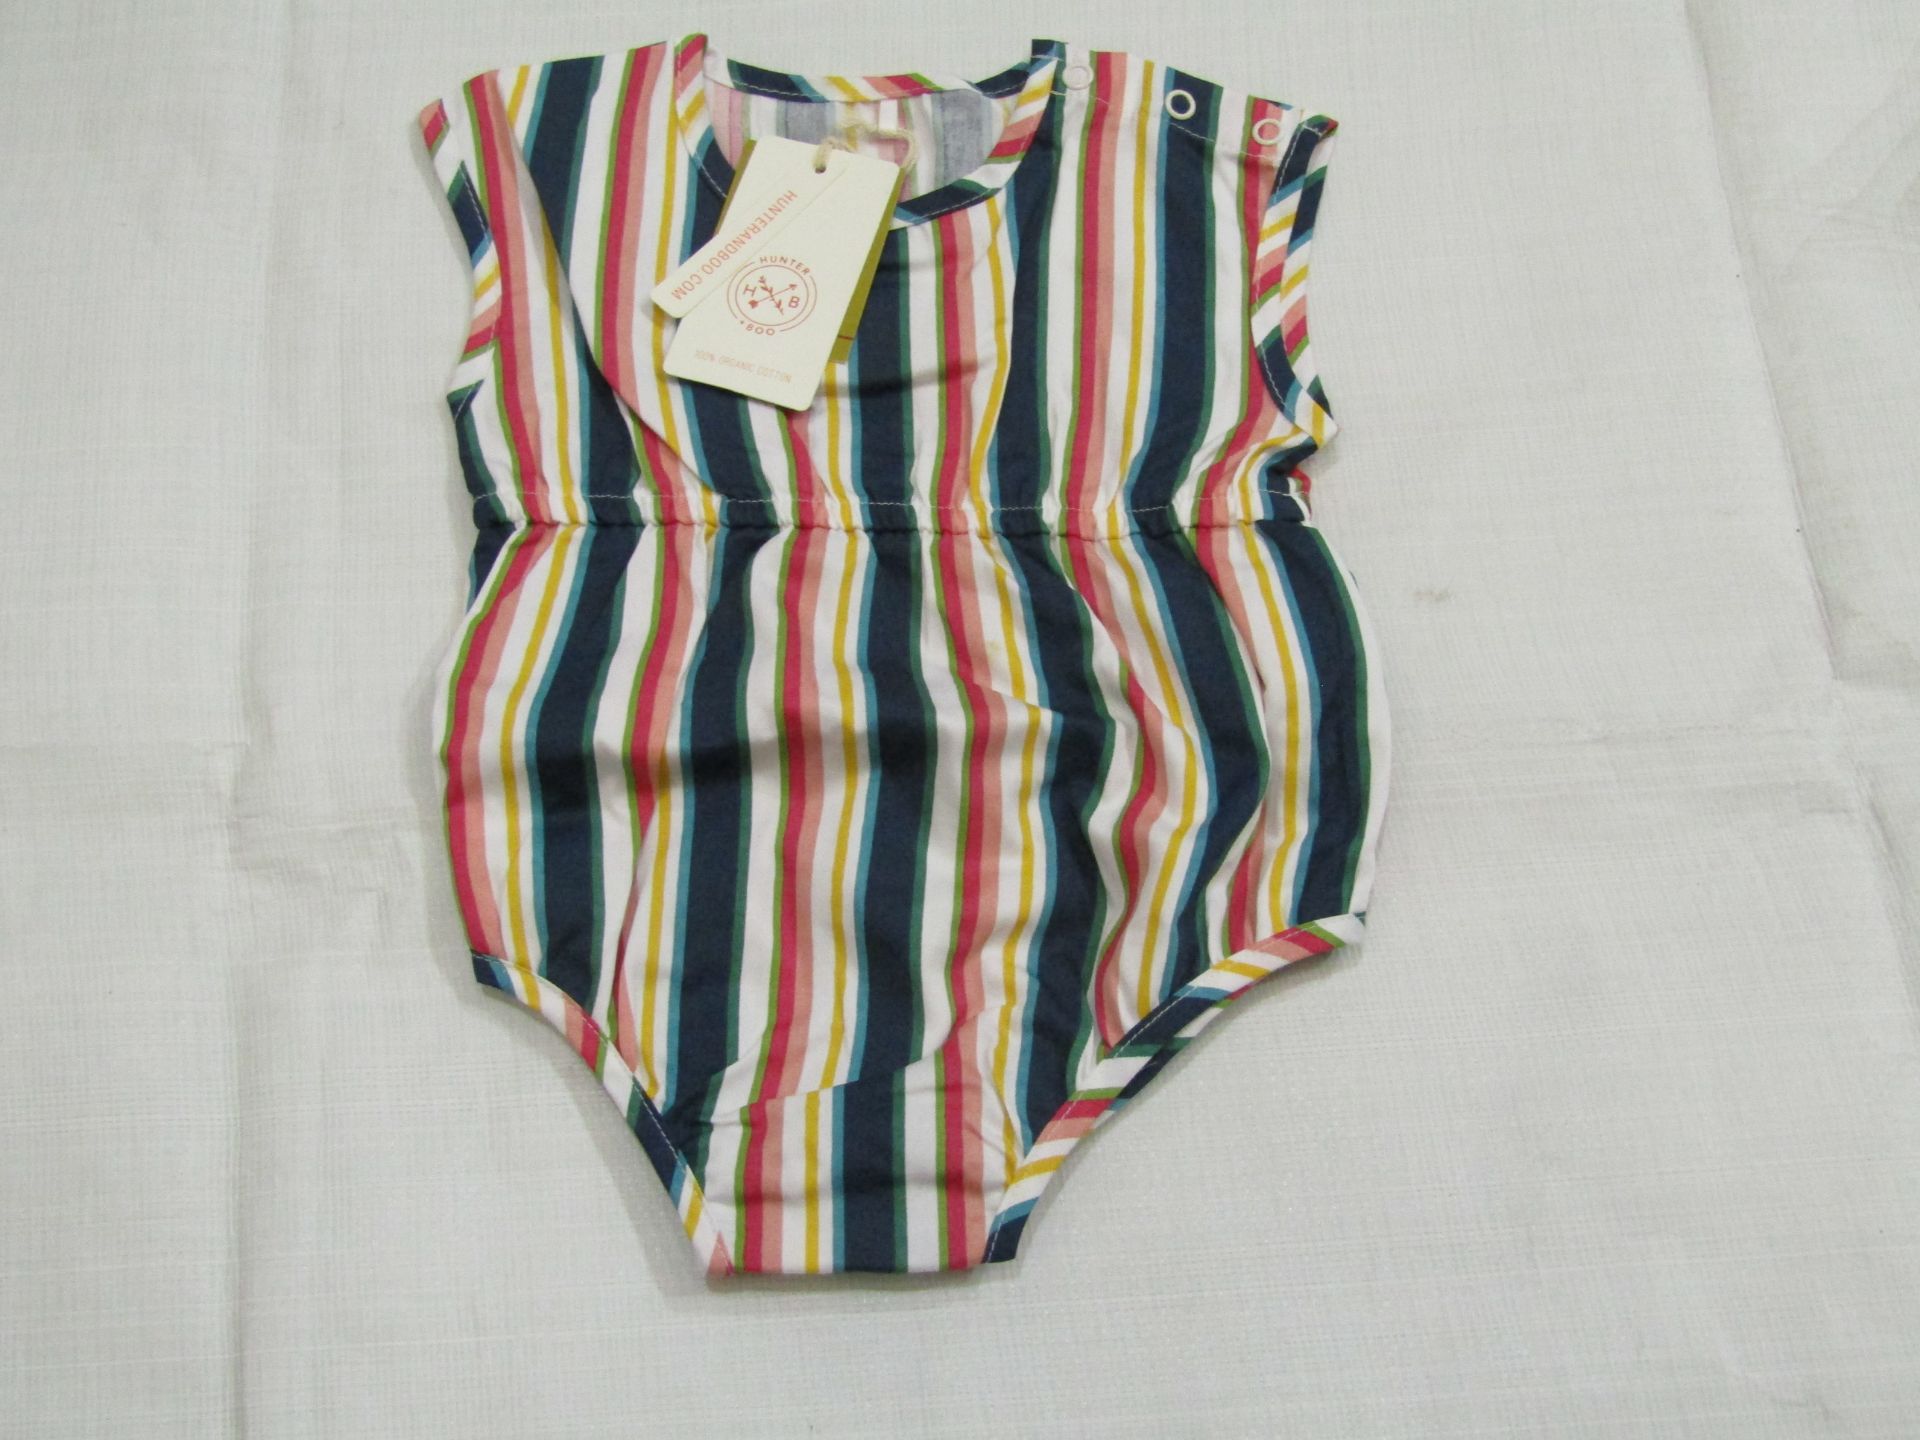 Hunter & Boo Helter Skelter Playsuit Aged 3-6 Months New & Packaged RRP £21